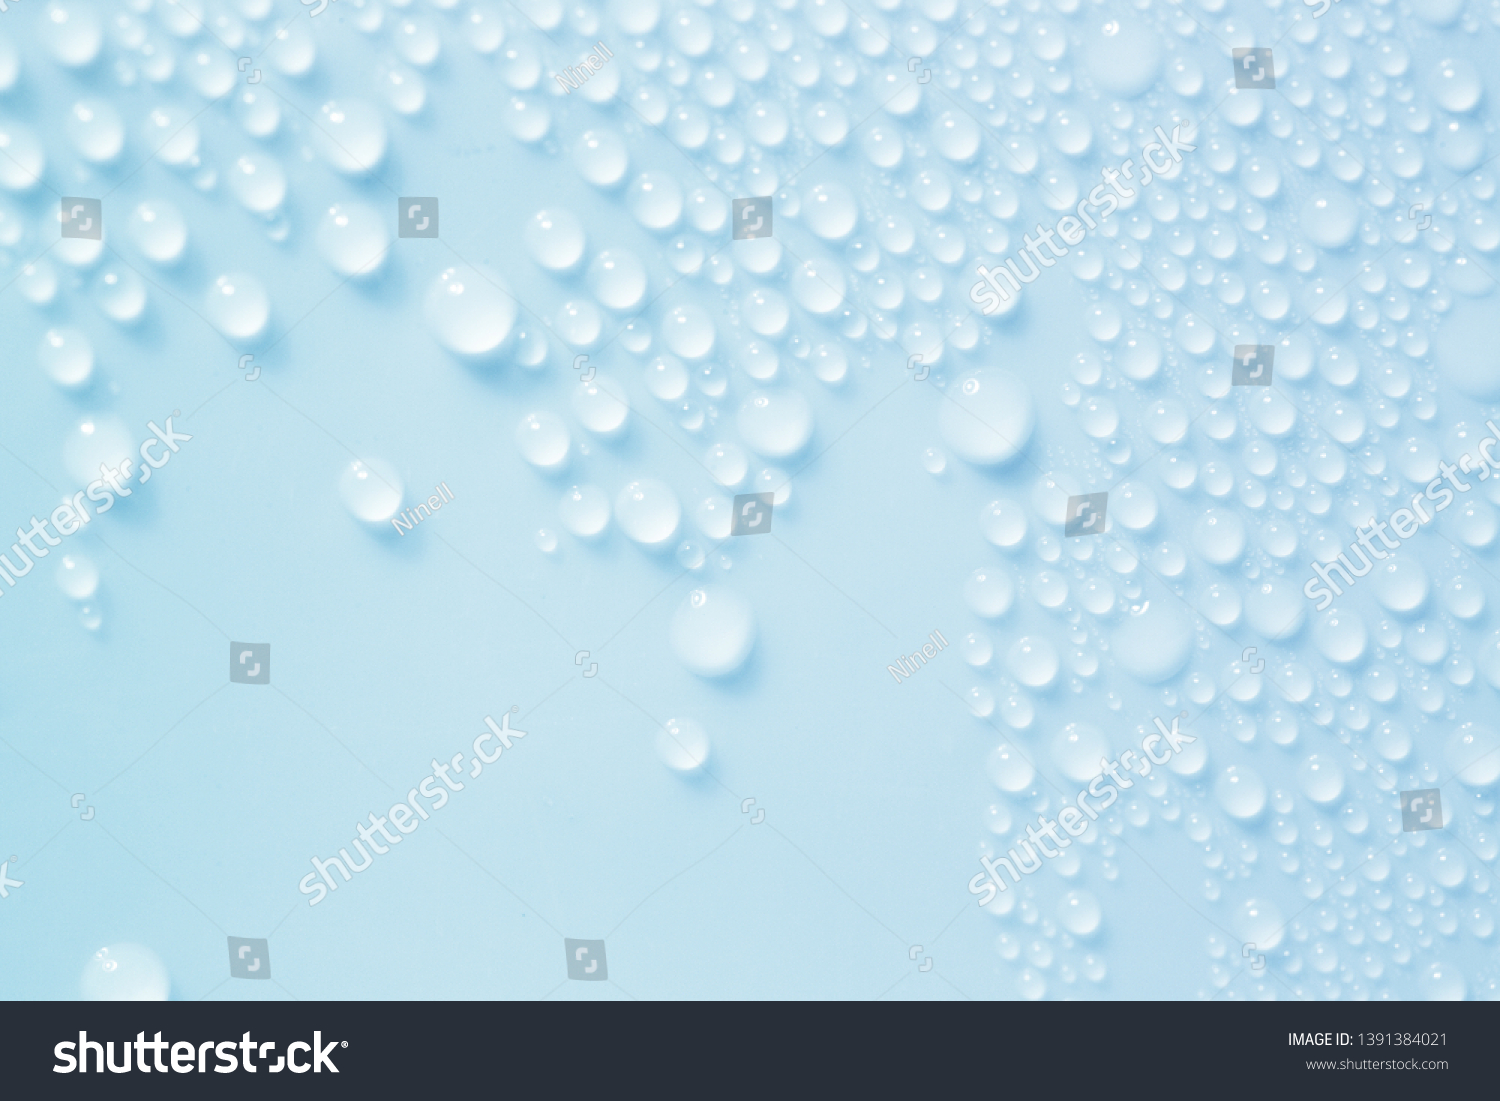 Water Drops. Bubbles close-up. The texture of gel cream. Oxygen bubbles in clear blue water, close-up. Mineral water. Water enriched with oxygen. #1391384021